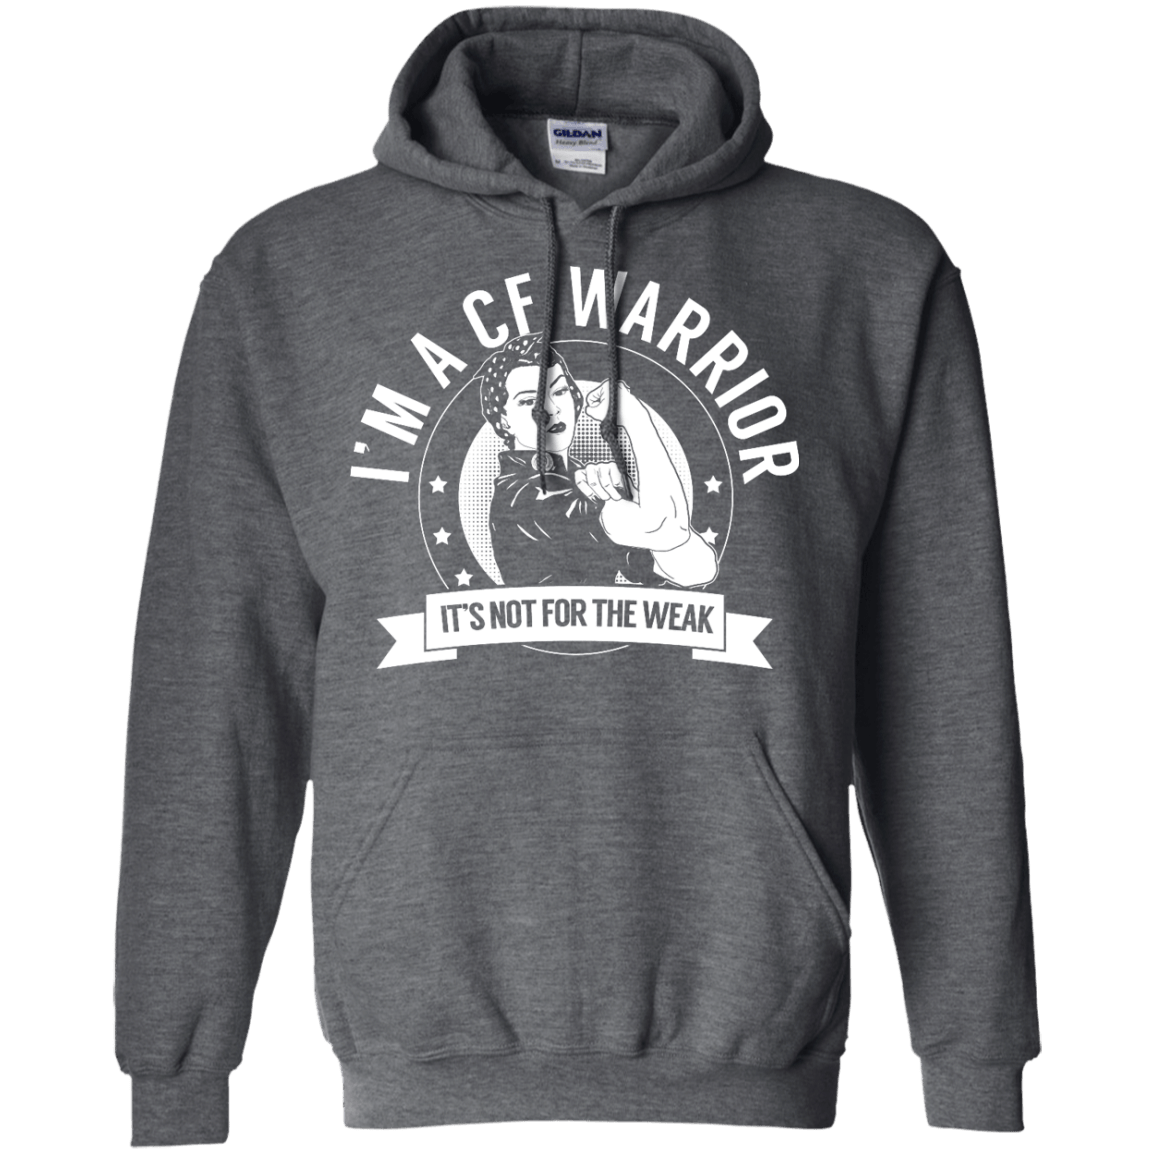 Cystic Fibrosis - CF Warrior Not For The Weak Pullover Hoodie 8 oz - The Unchargeables